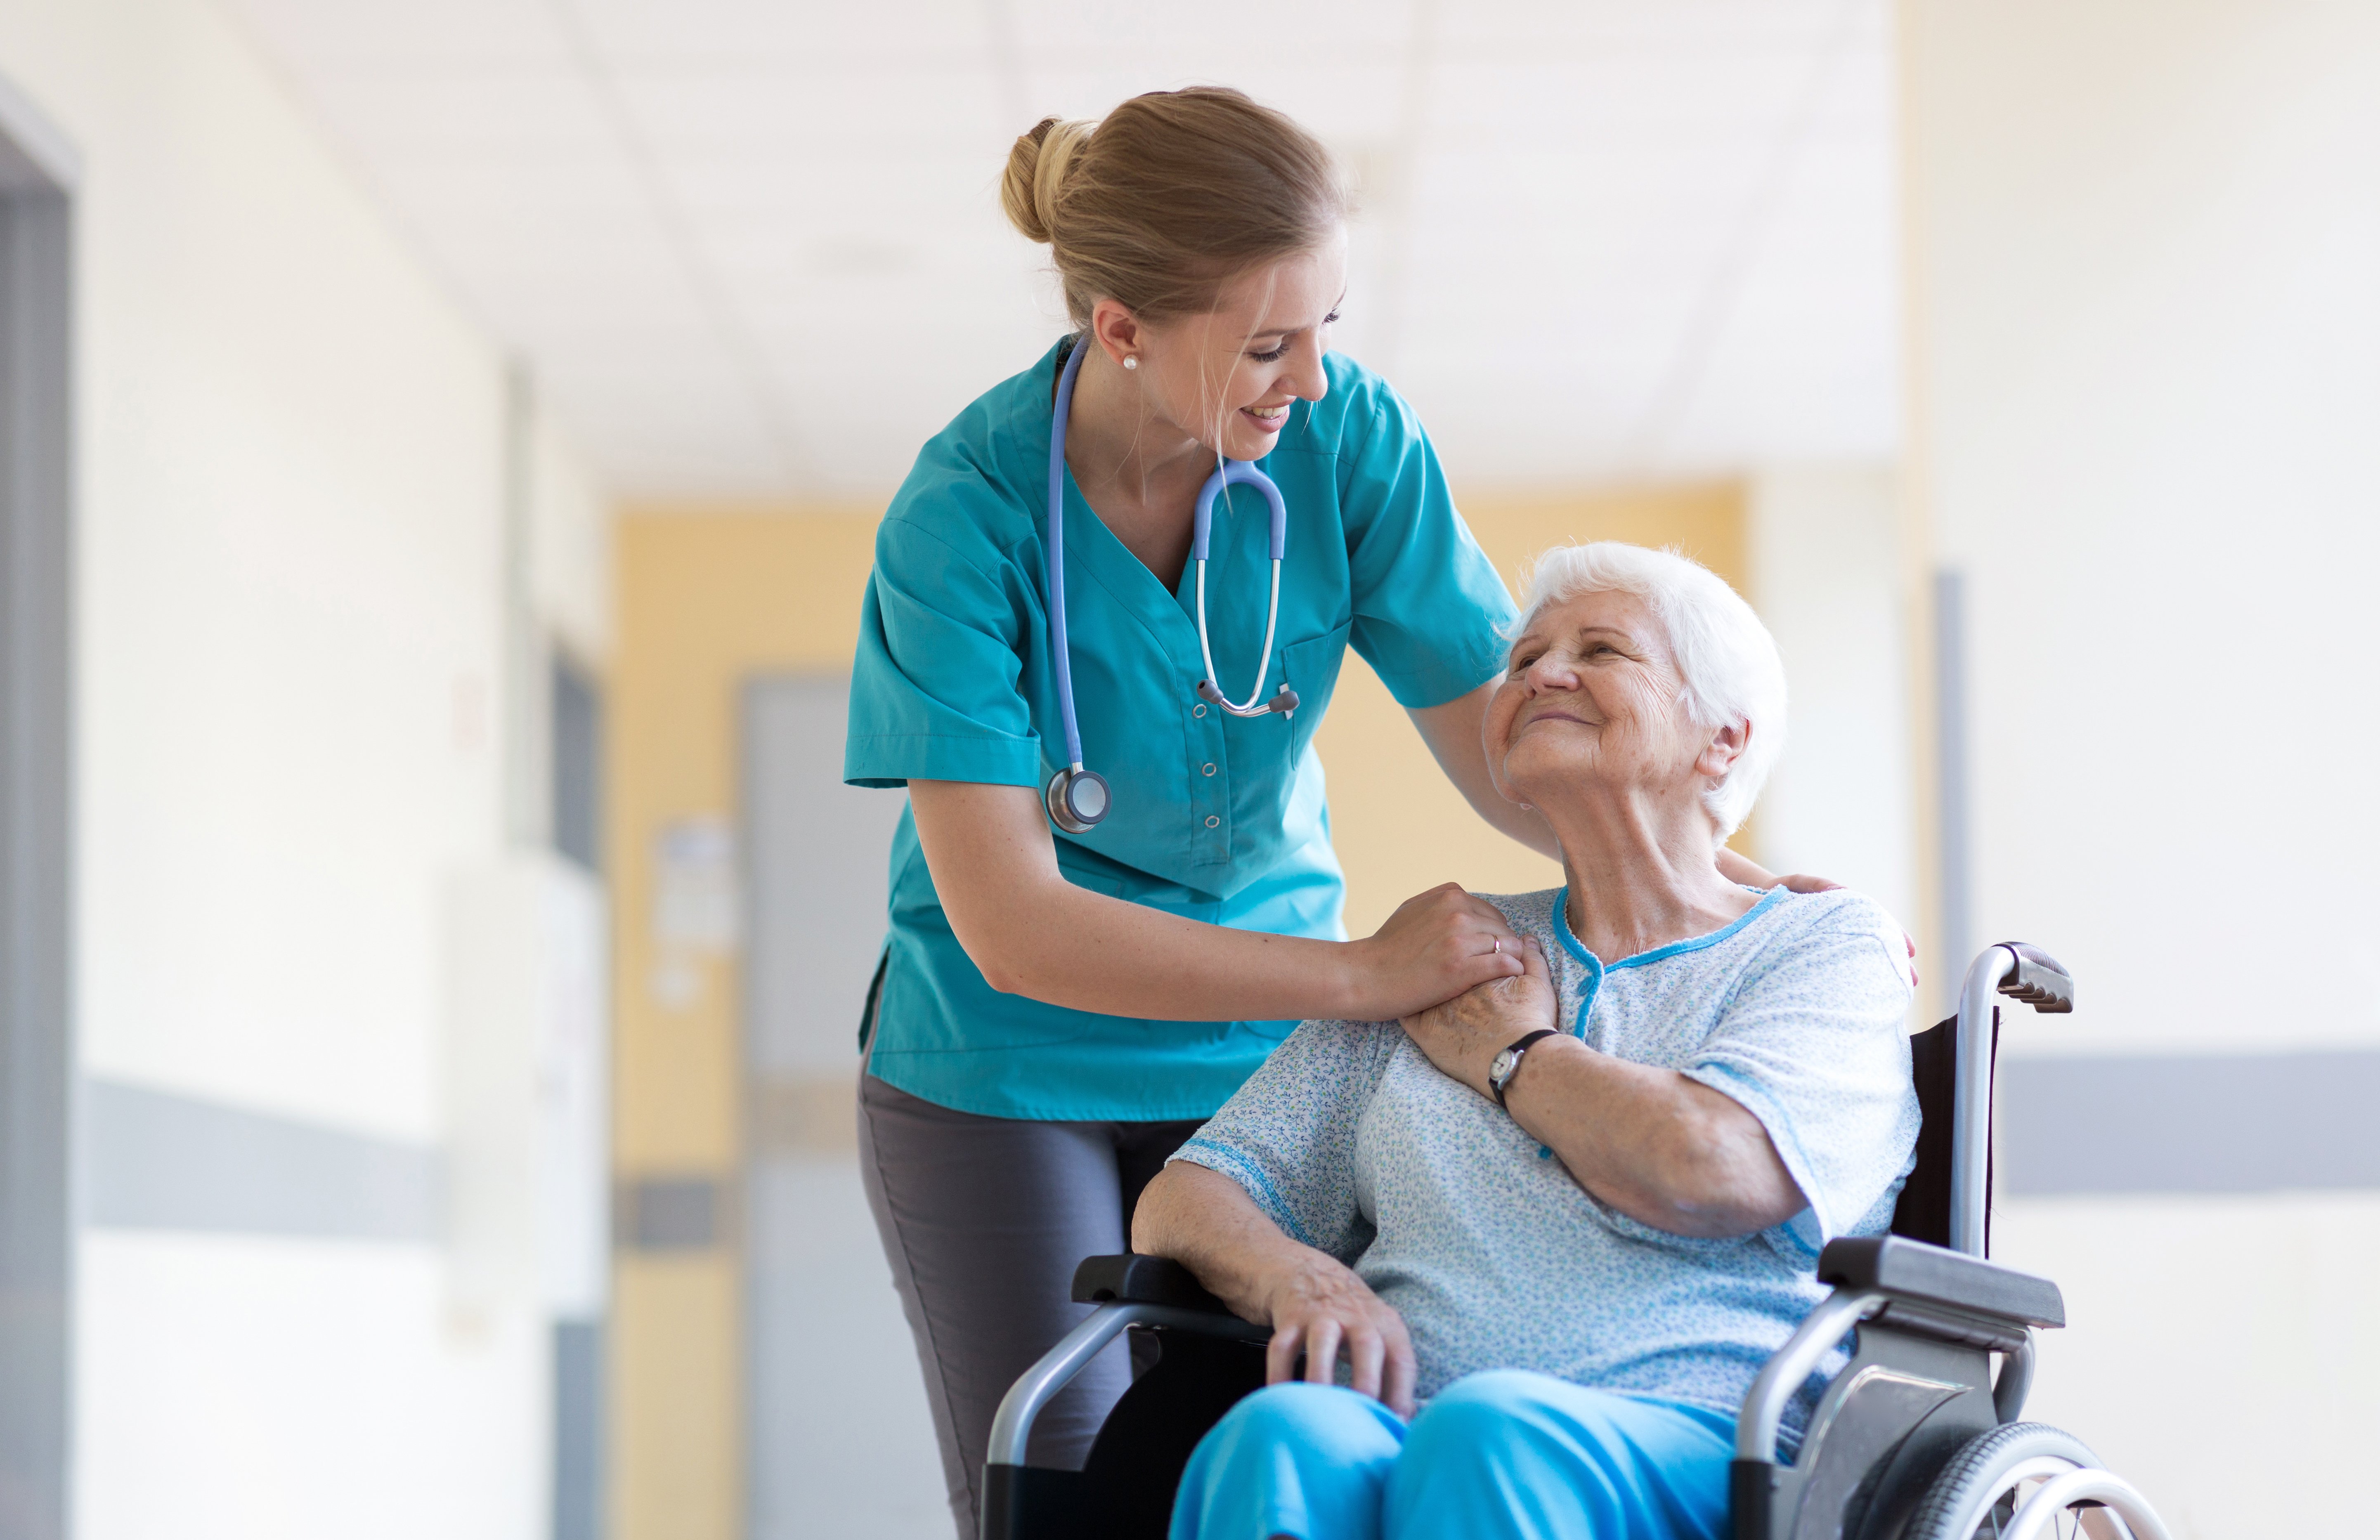 Falls Prevention Awareness Week: Involve Patients